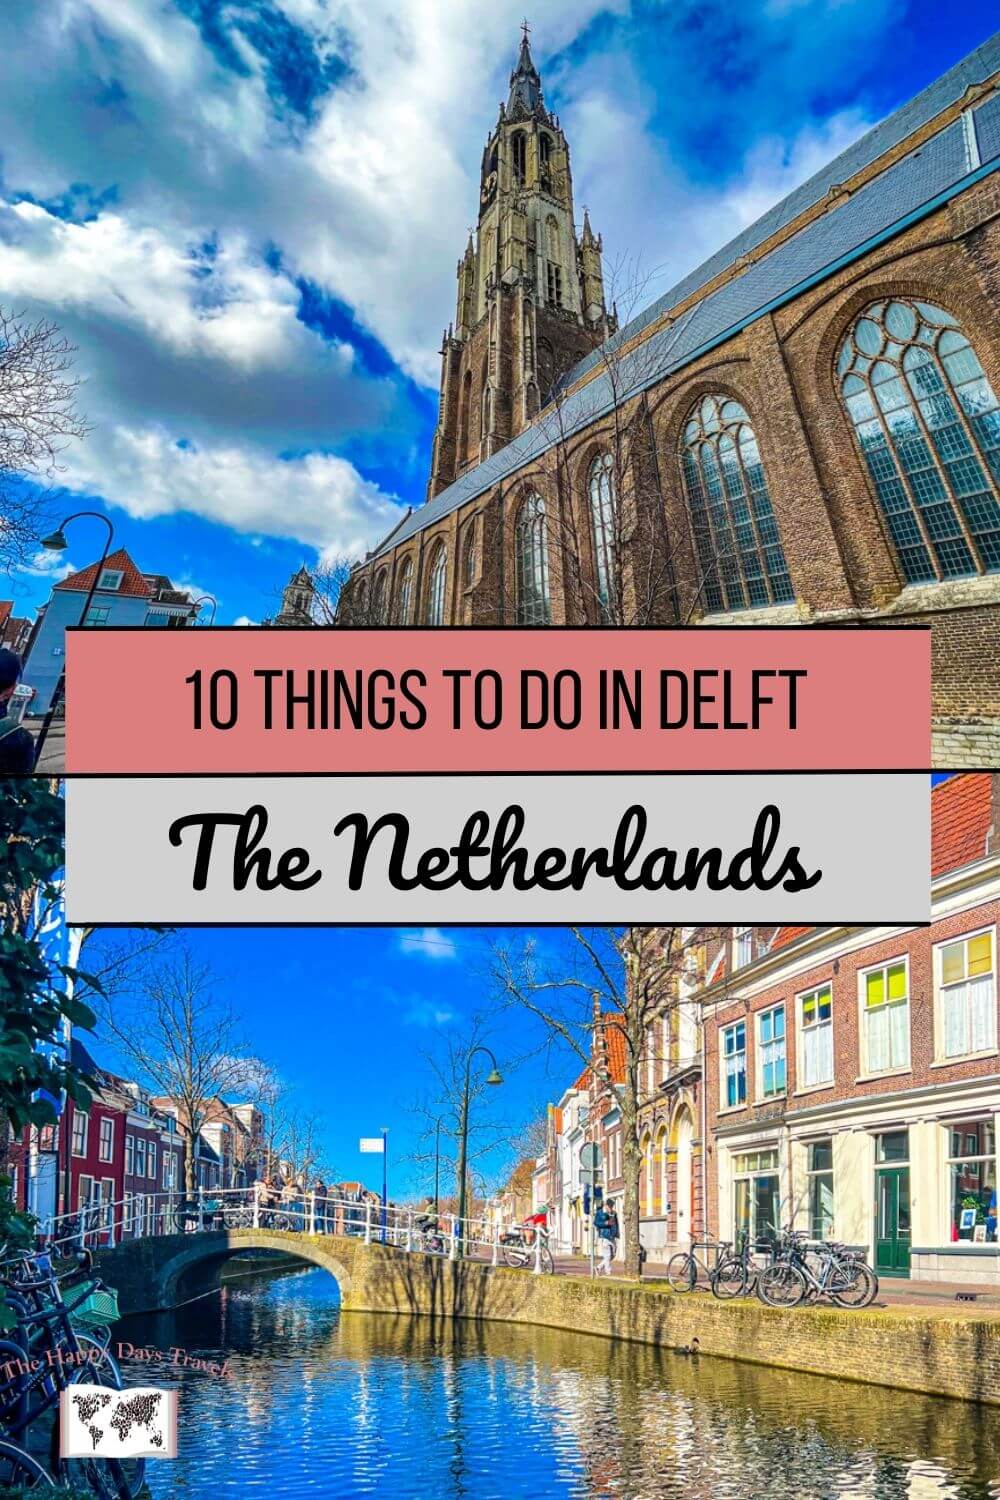 Pin Image for '10 Things to do in Delft The Netherlands' Top image is de Kerk Delft, bottom image is a Canal in Delft